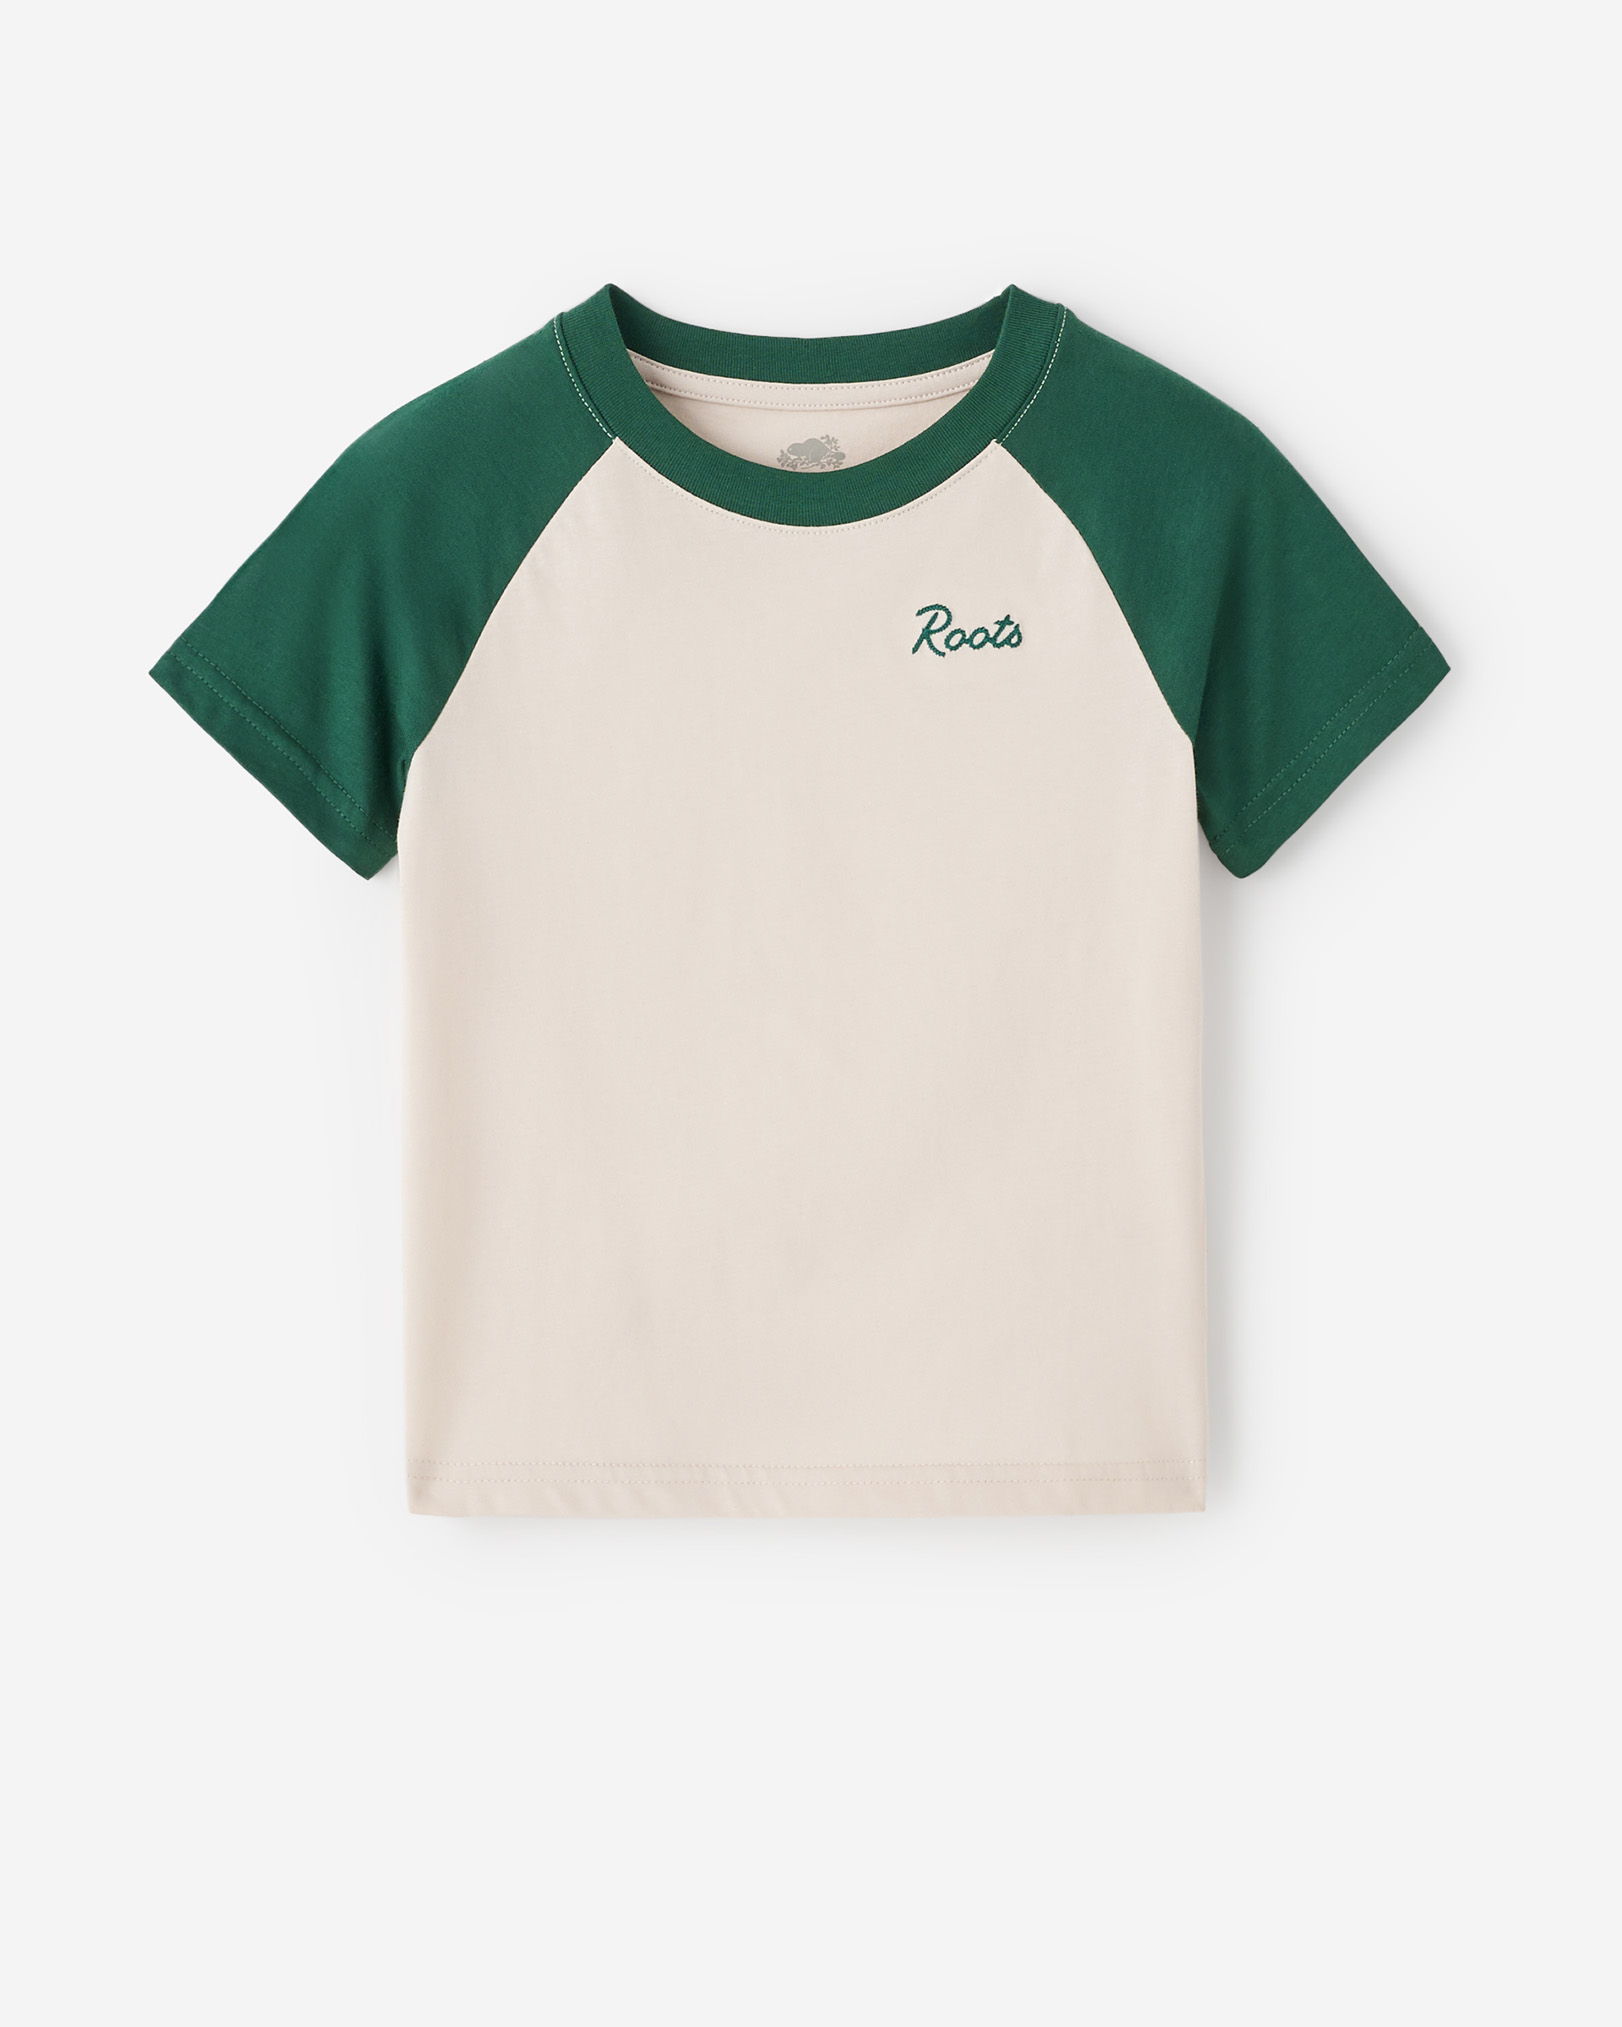 Roots Toddler Boy's Baseball T-Shirt in Sandstone